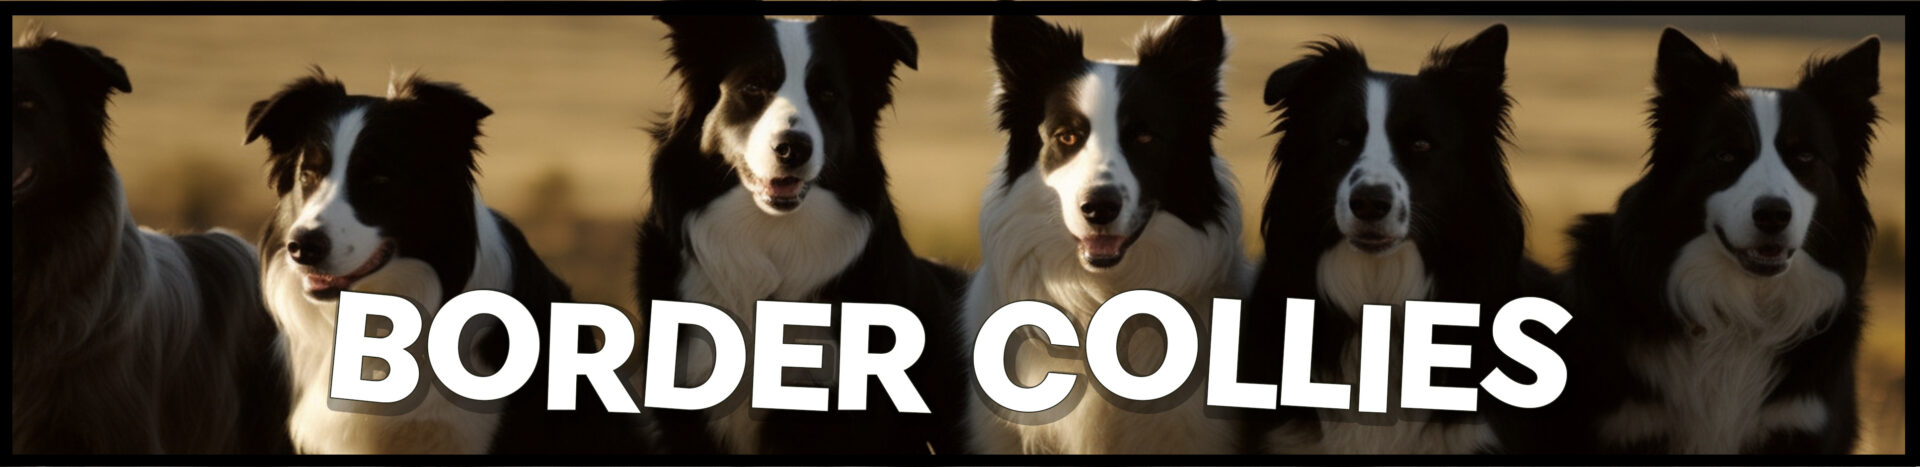 Border Collie Gifts - Mowbi Brand Gifts